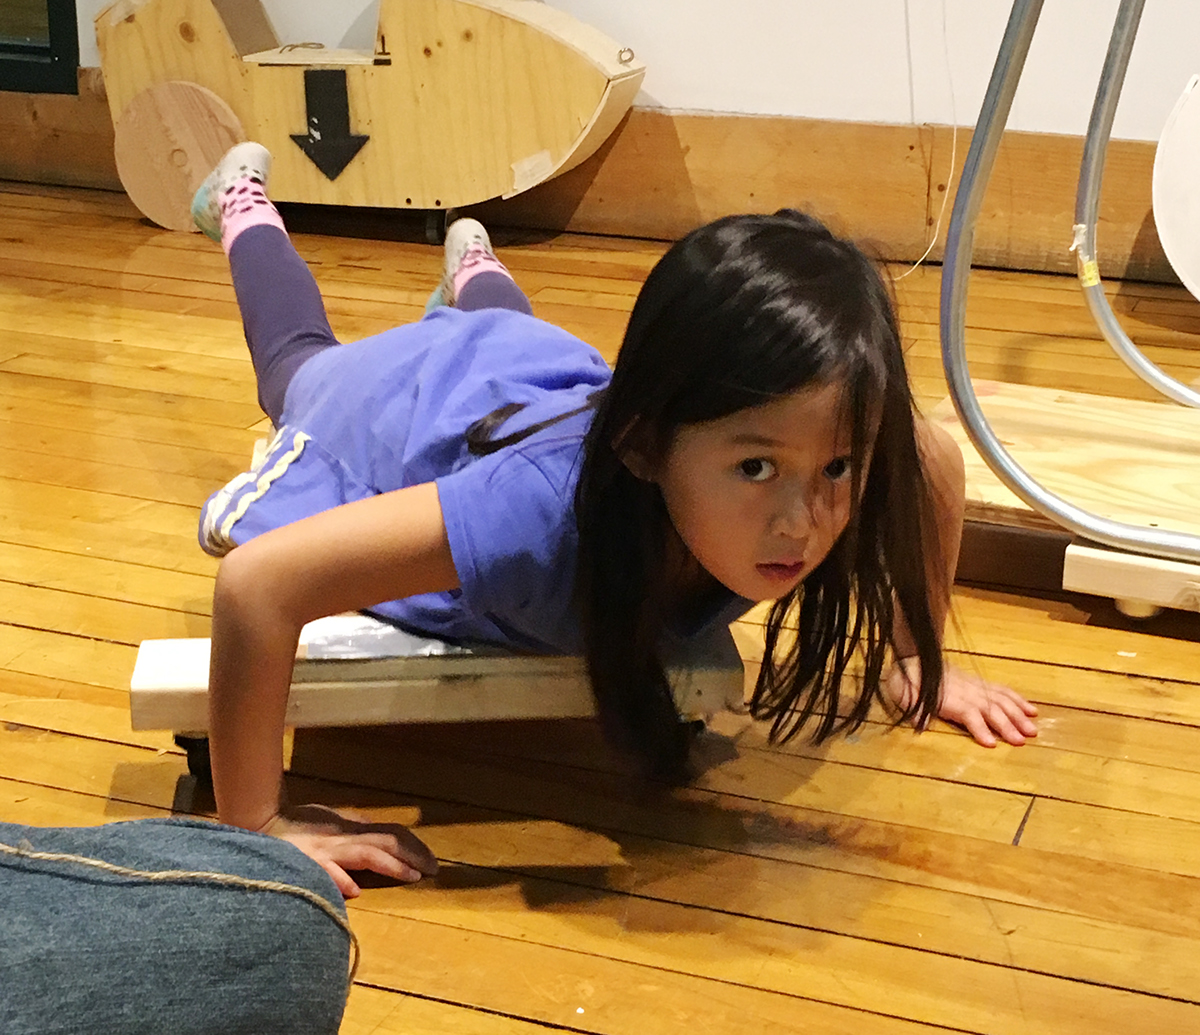 Scooter FLOOR ride-on toddlers preschoolers spin ayako takase risd toy prototyping form